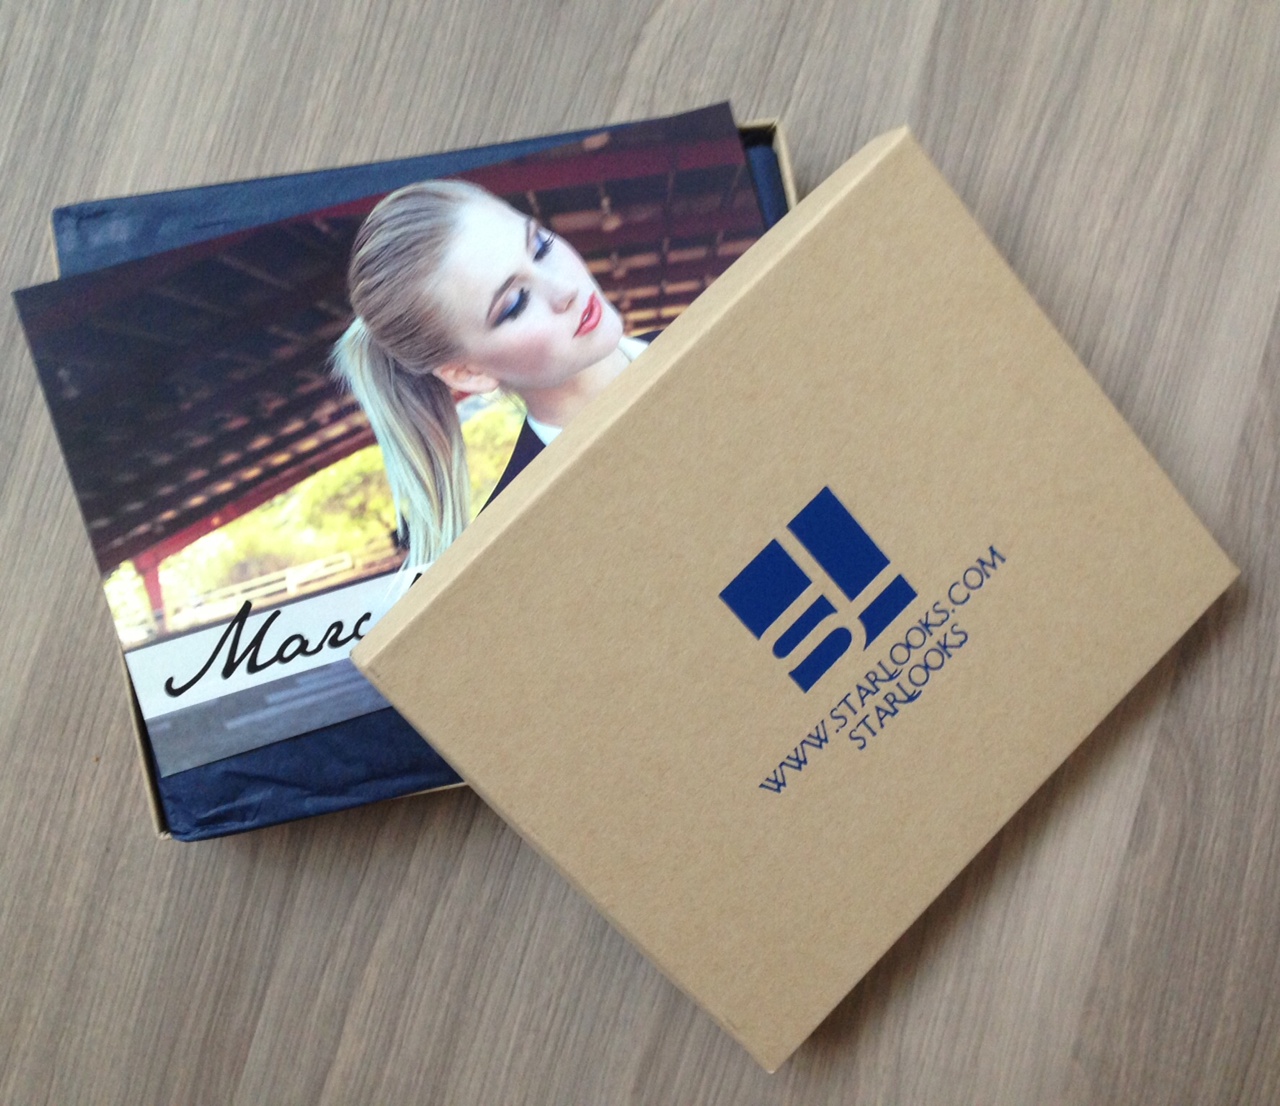 Starbox Makeup Subscription Review – Monthly Beauty Boxes – March 2013